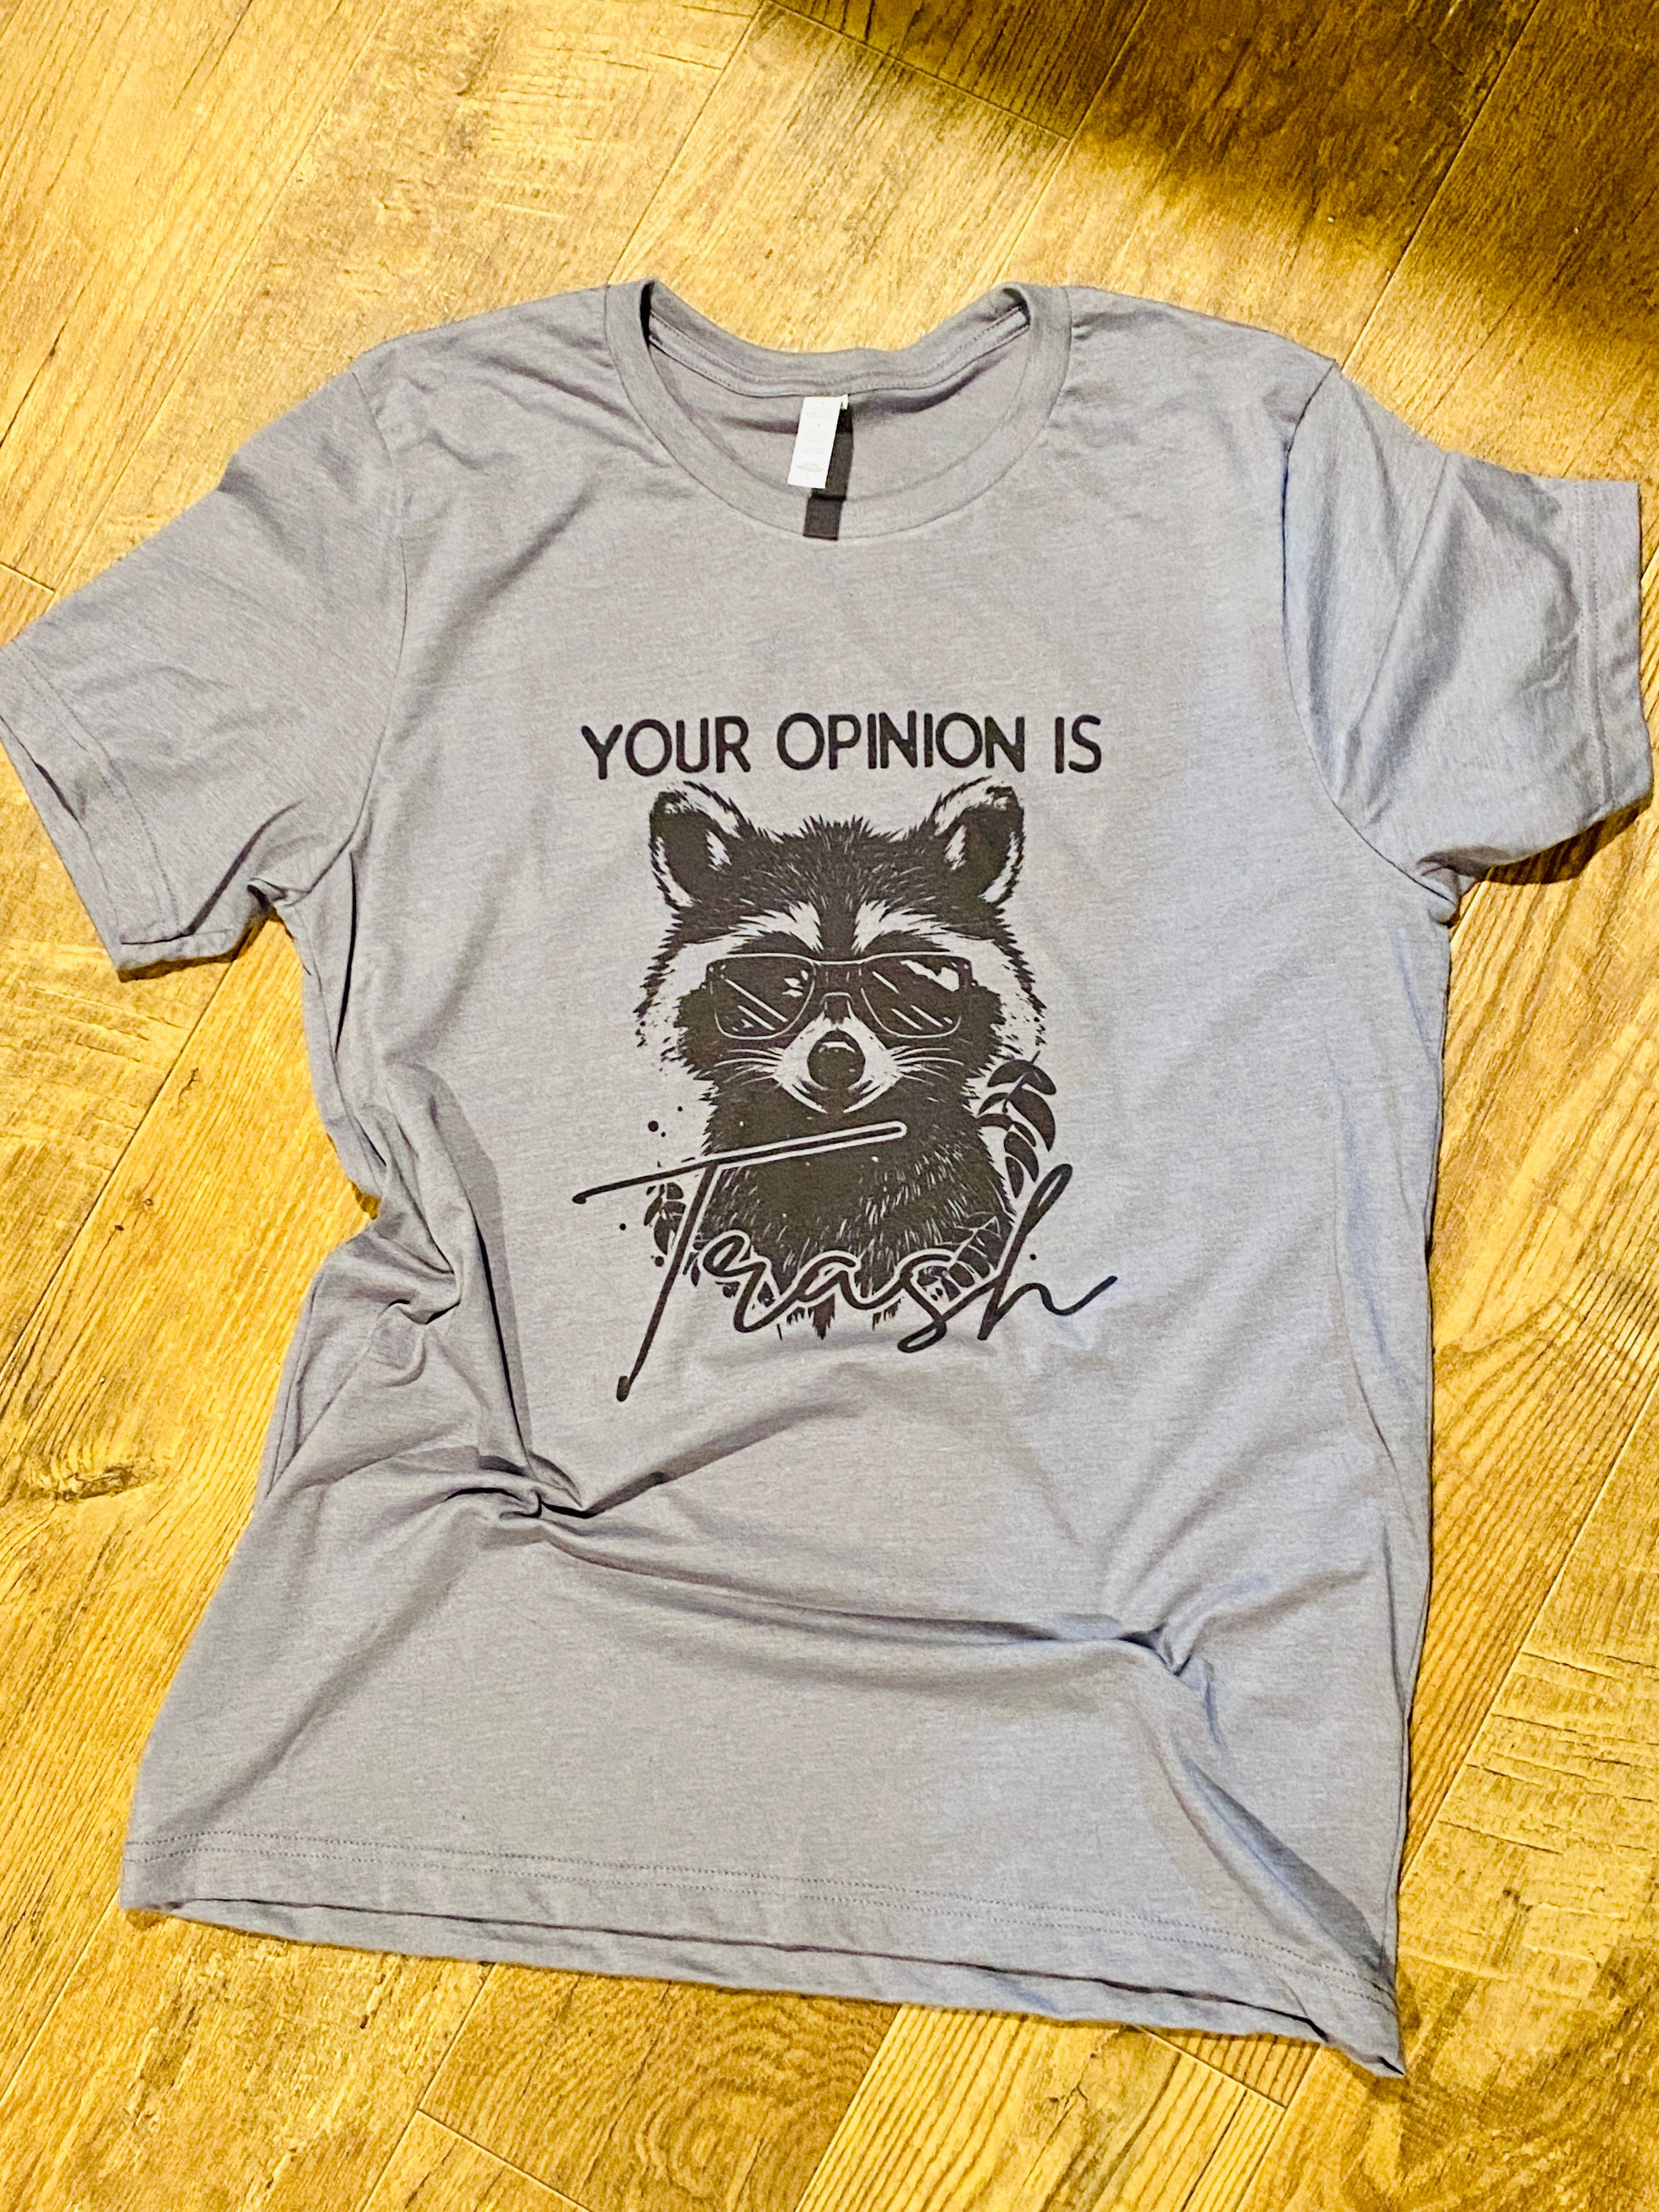 Your Opinion is Trash Tee